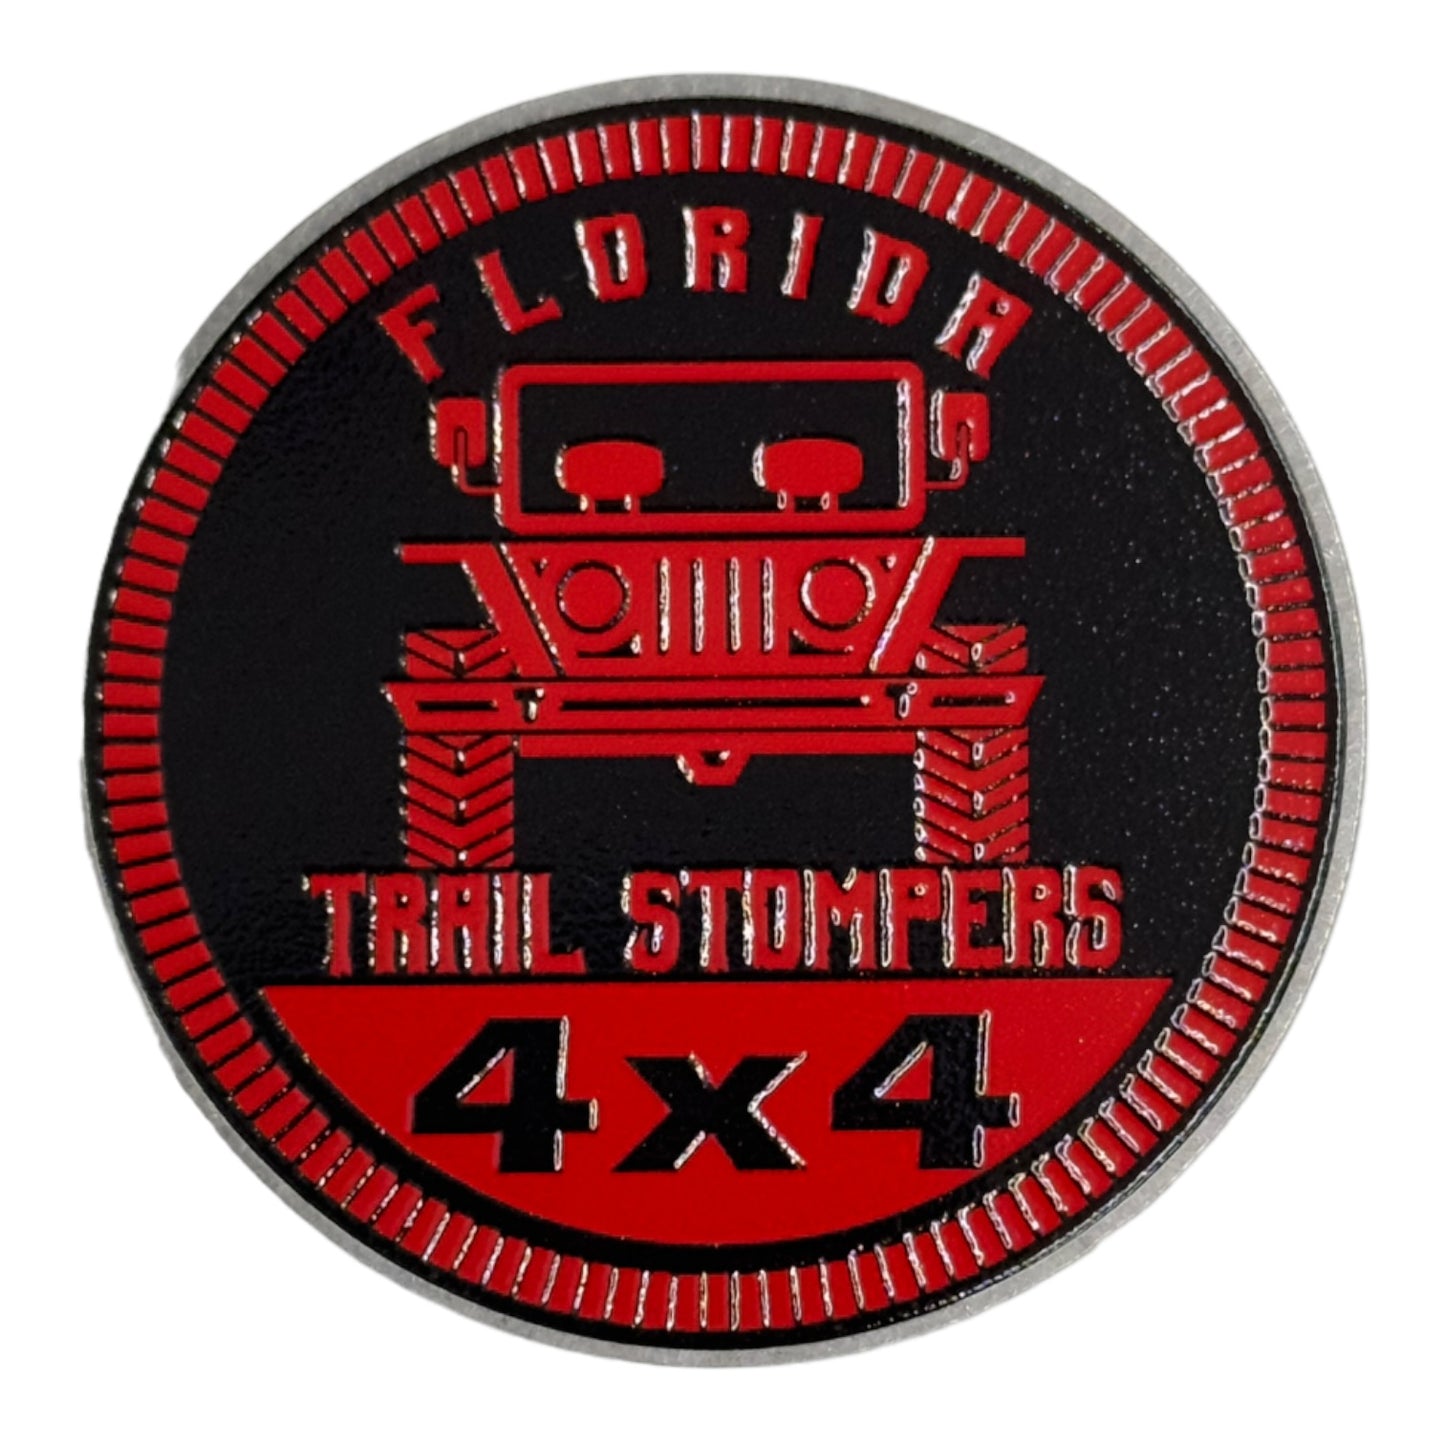 Badge - Florida Trail Stompers (Multiple Colors Available)